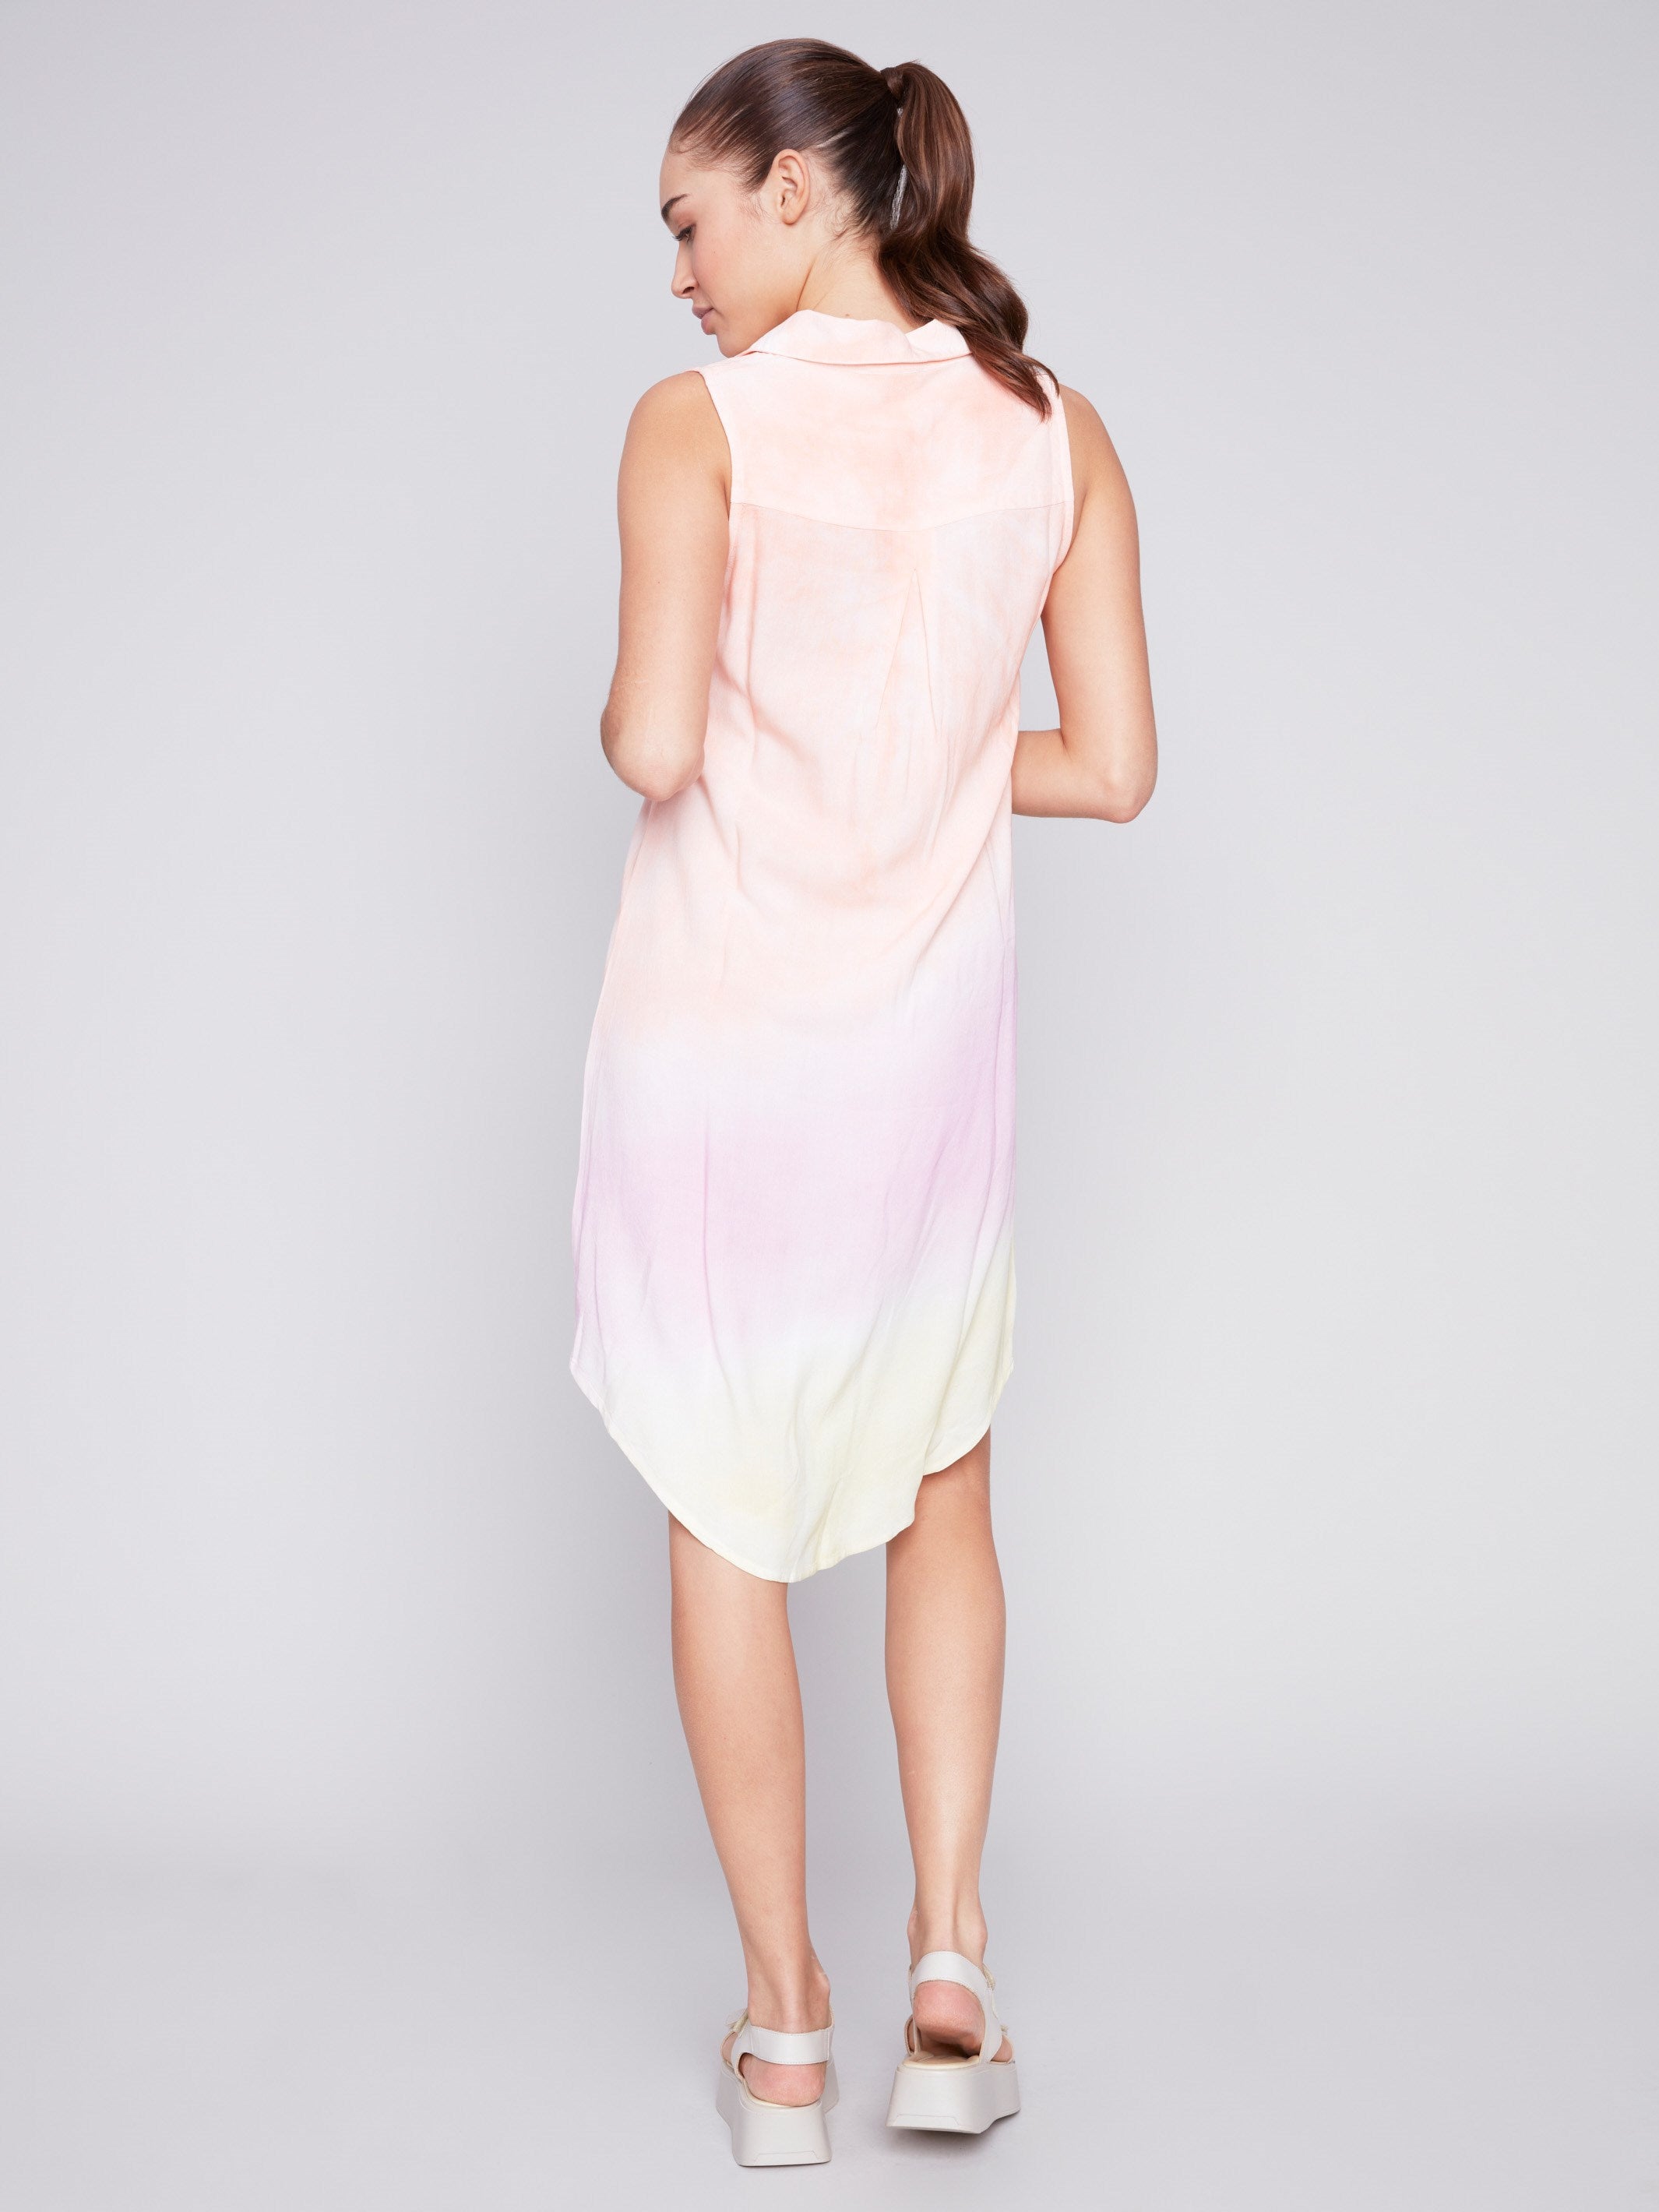 Tie-Dye Sleeveless Button-Front Dress - Dawn - Charlie B Collection Canada - Image 2